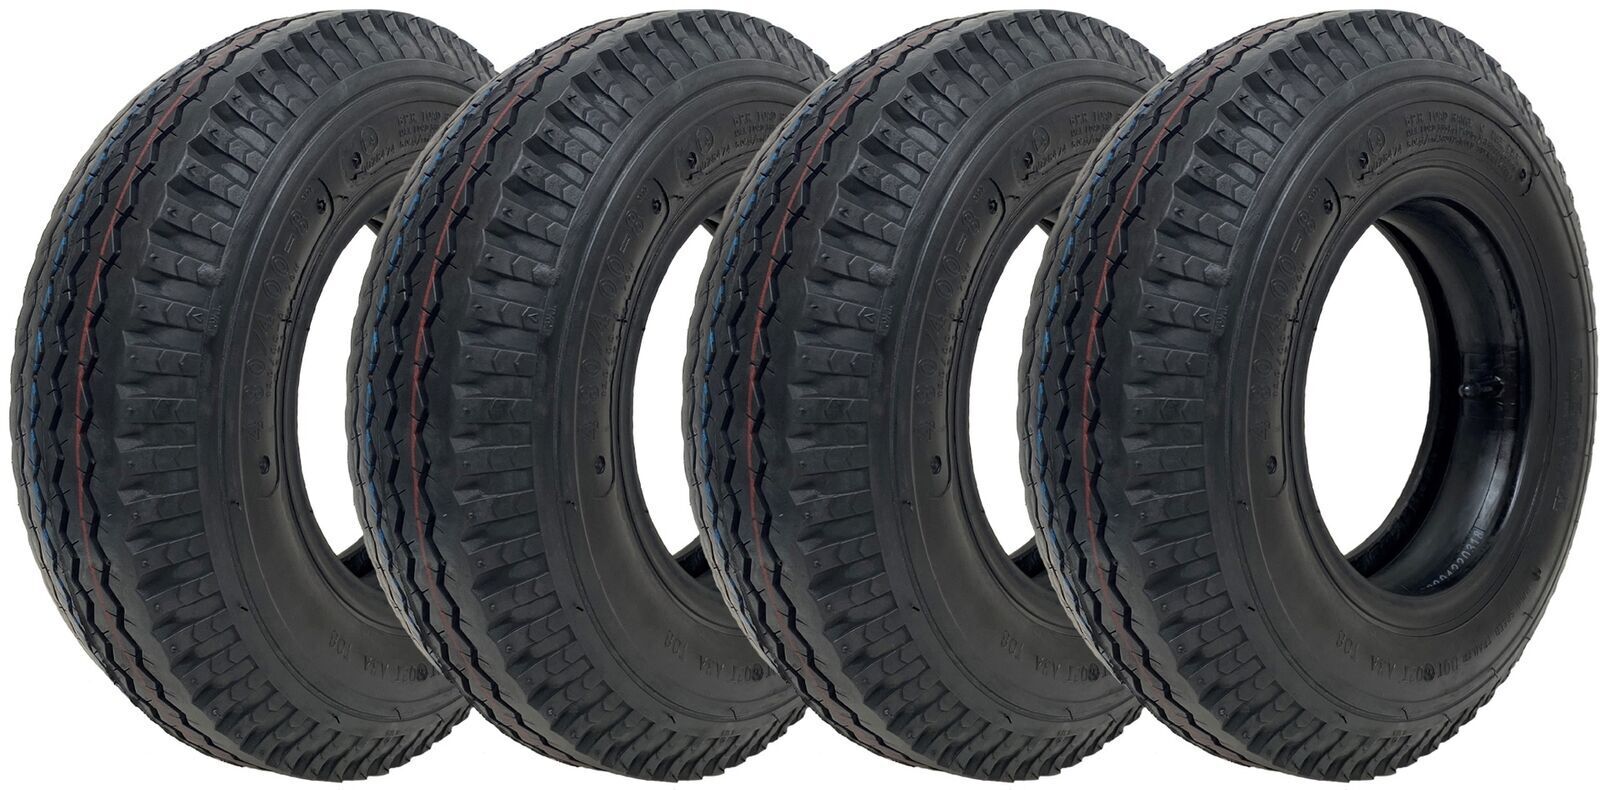 Image of 4.80/4.00-8 Kenda Trailer Tire & Tube 6ply High Speed E-Marked Legal (Set di 4)